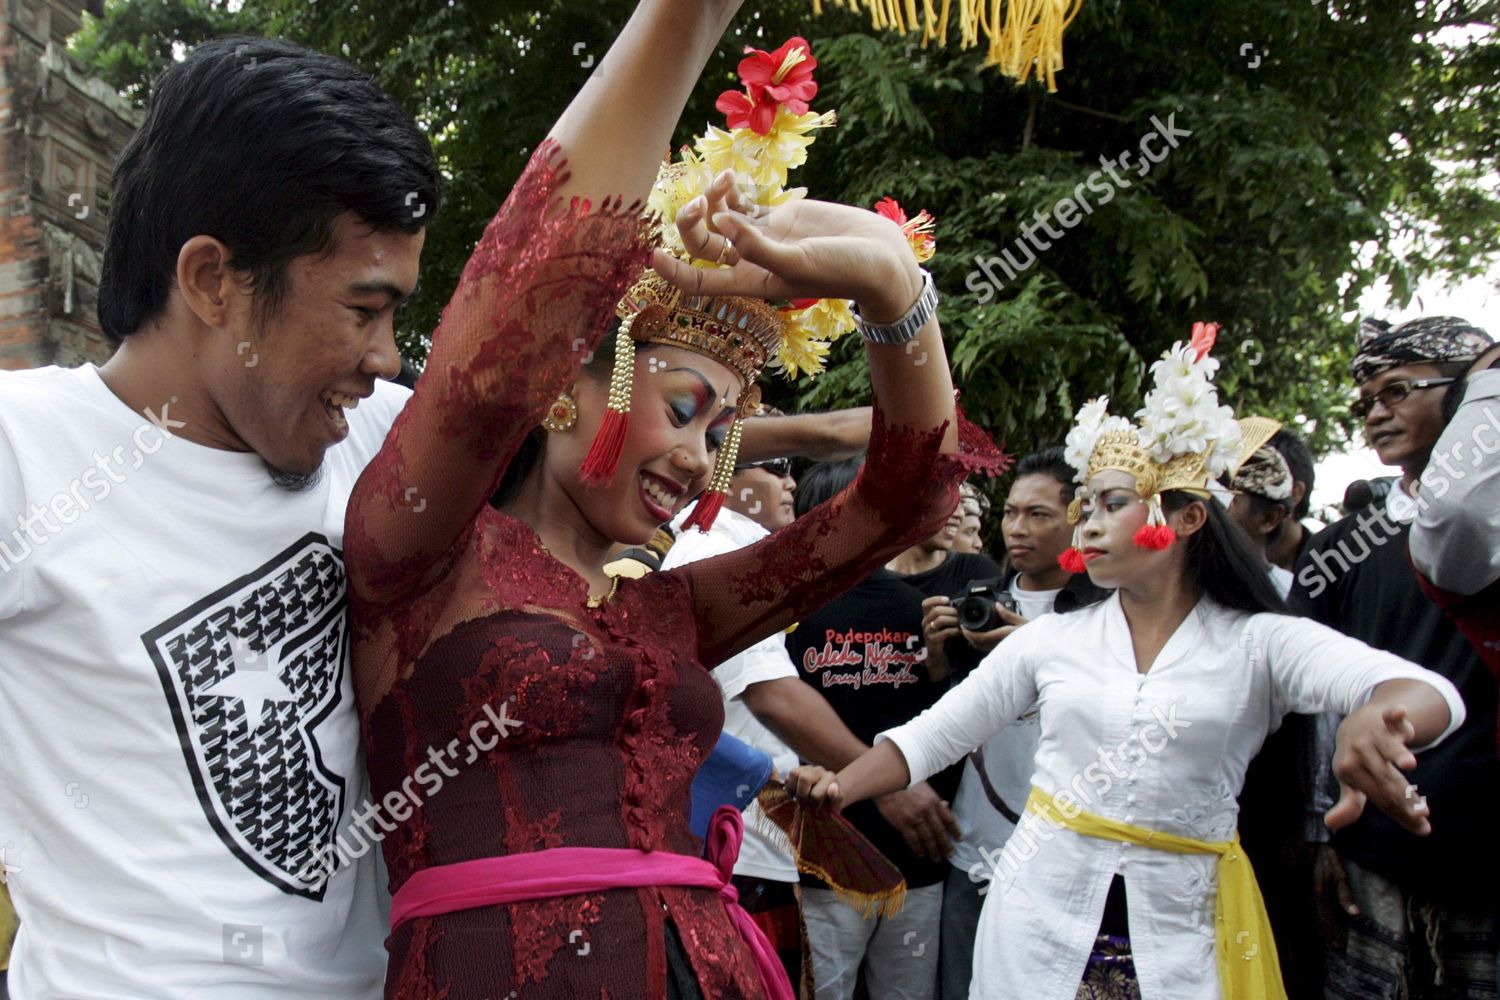 Balinese Porn - Balinese Dancers Perform During Rally Protest Against ...